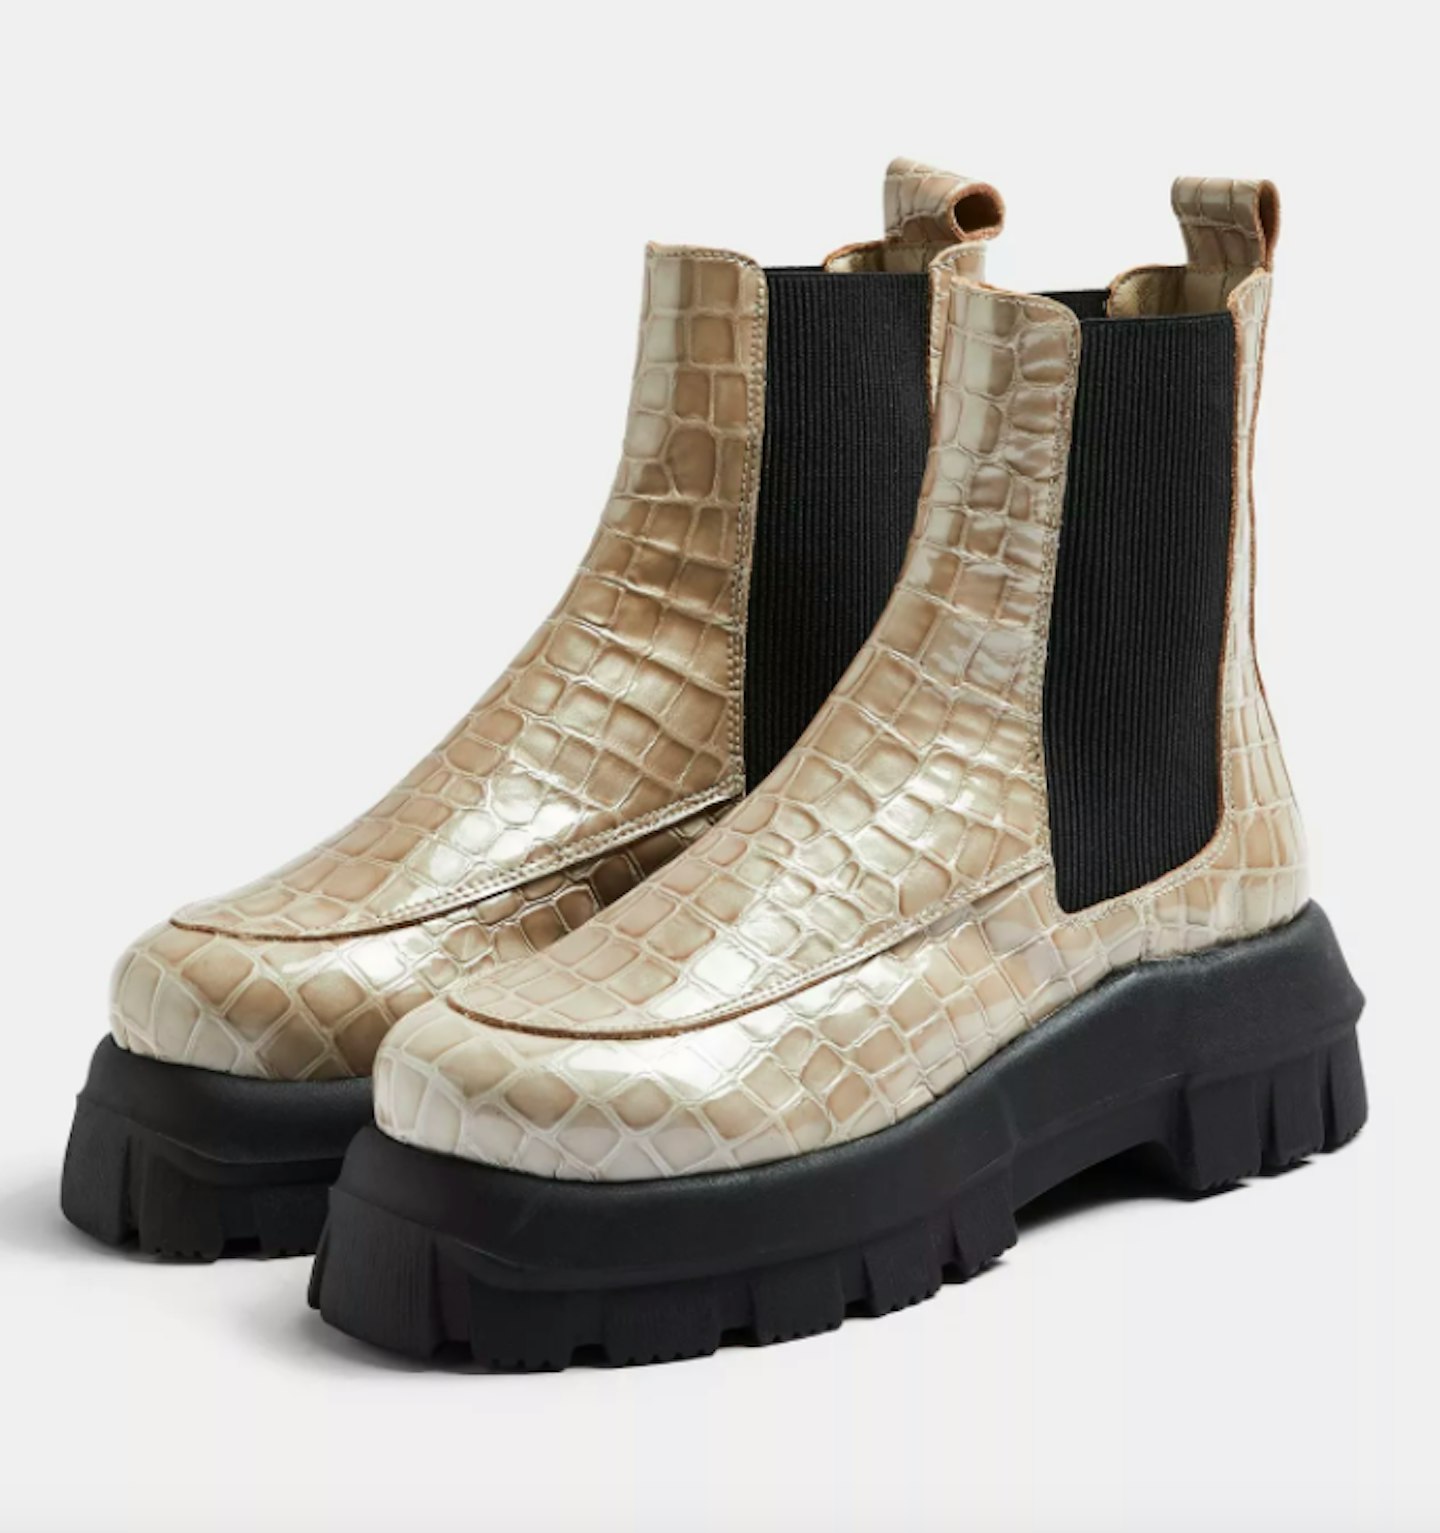 Topshop, Alpha Stone Chunky Leather Chelsea Boots, WAS £95.99, NOW £71.99